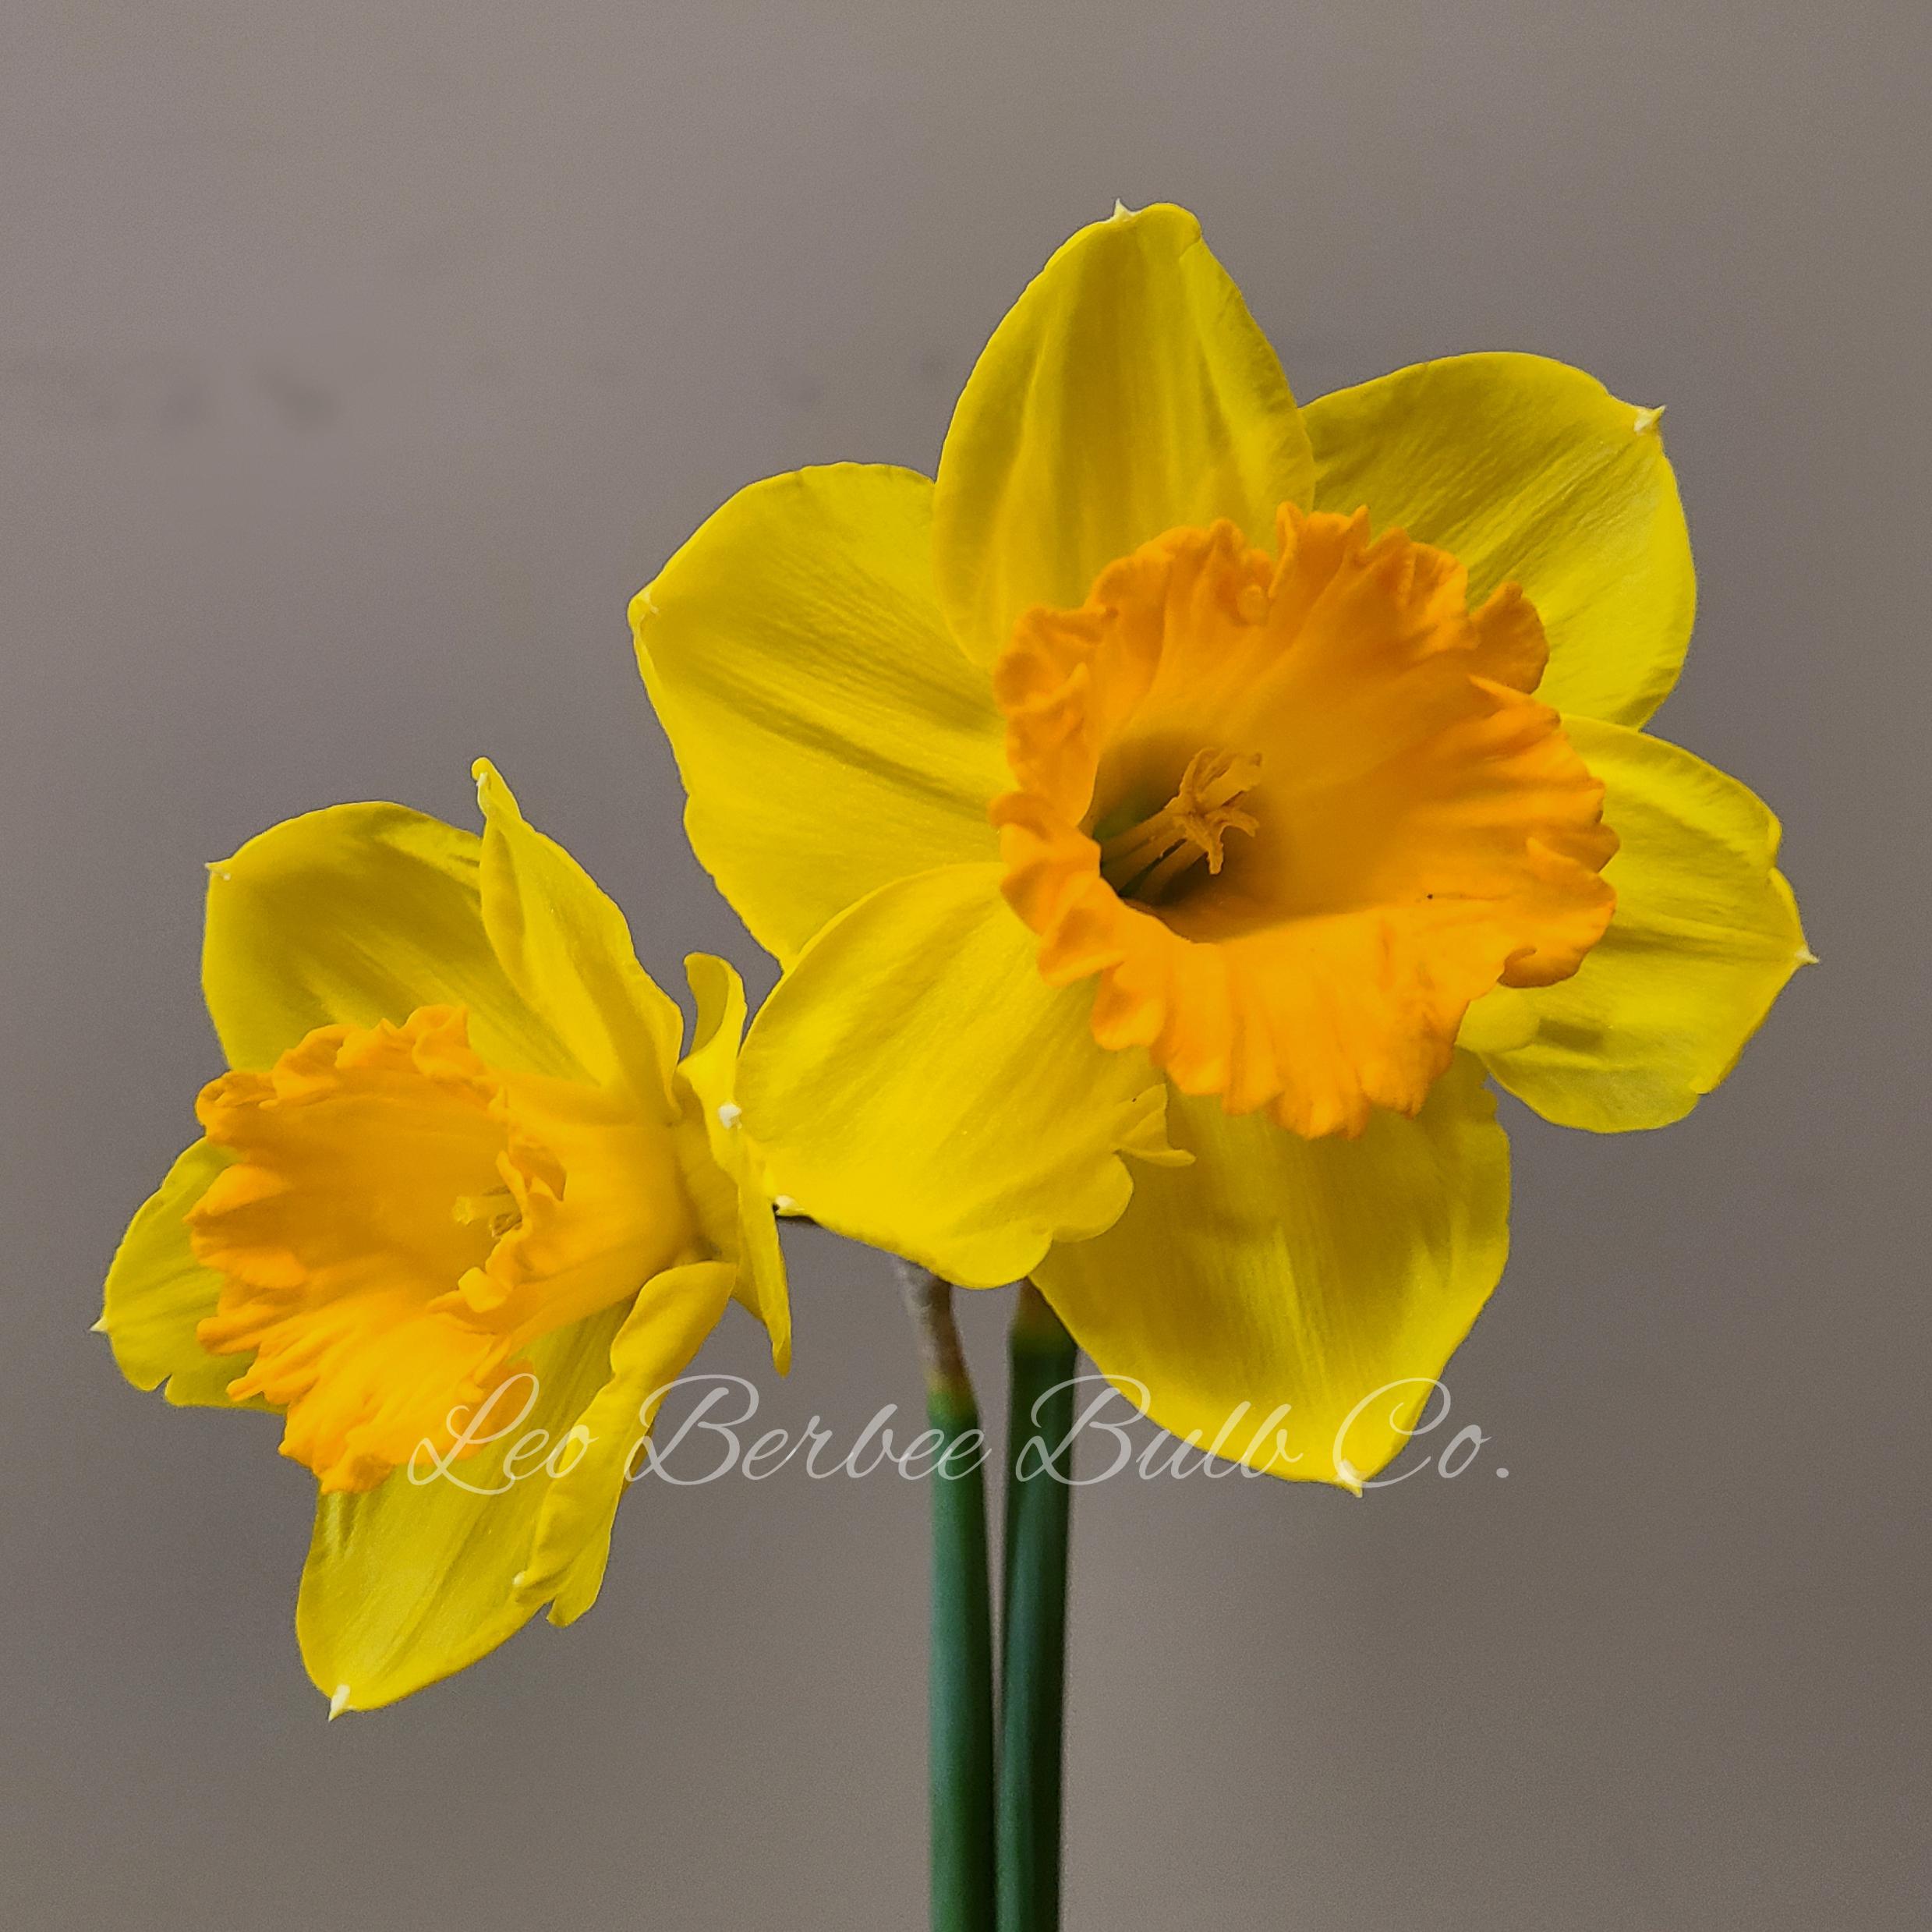 Daffodil Large Cupped Fortune from Leo Berbee Bulb Company